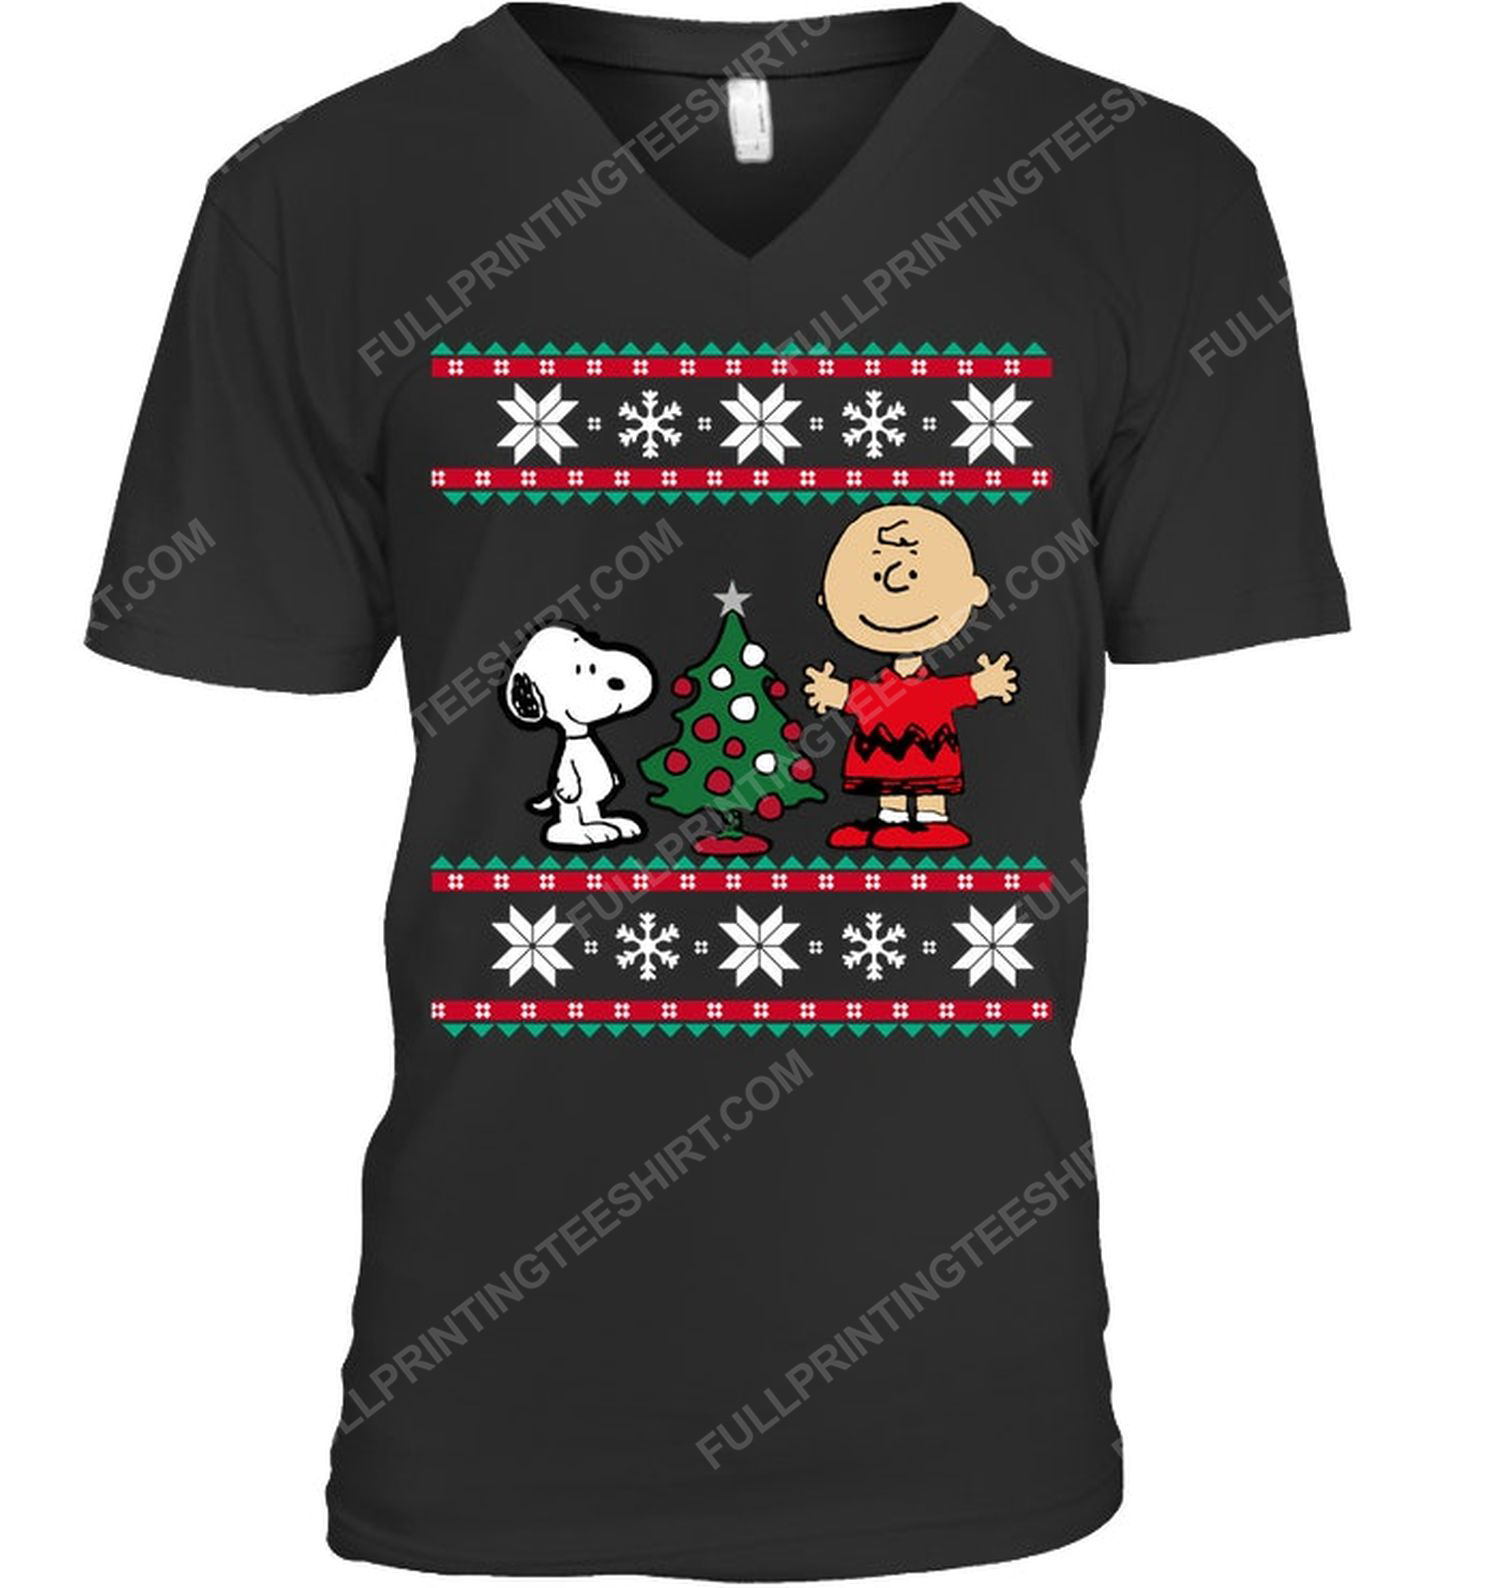 Charlie brown and snoopy with christmas tree v-neck